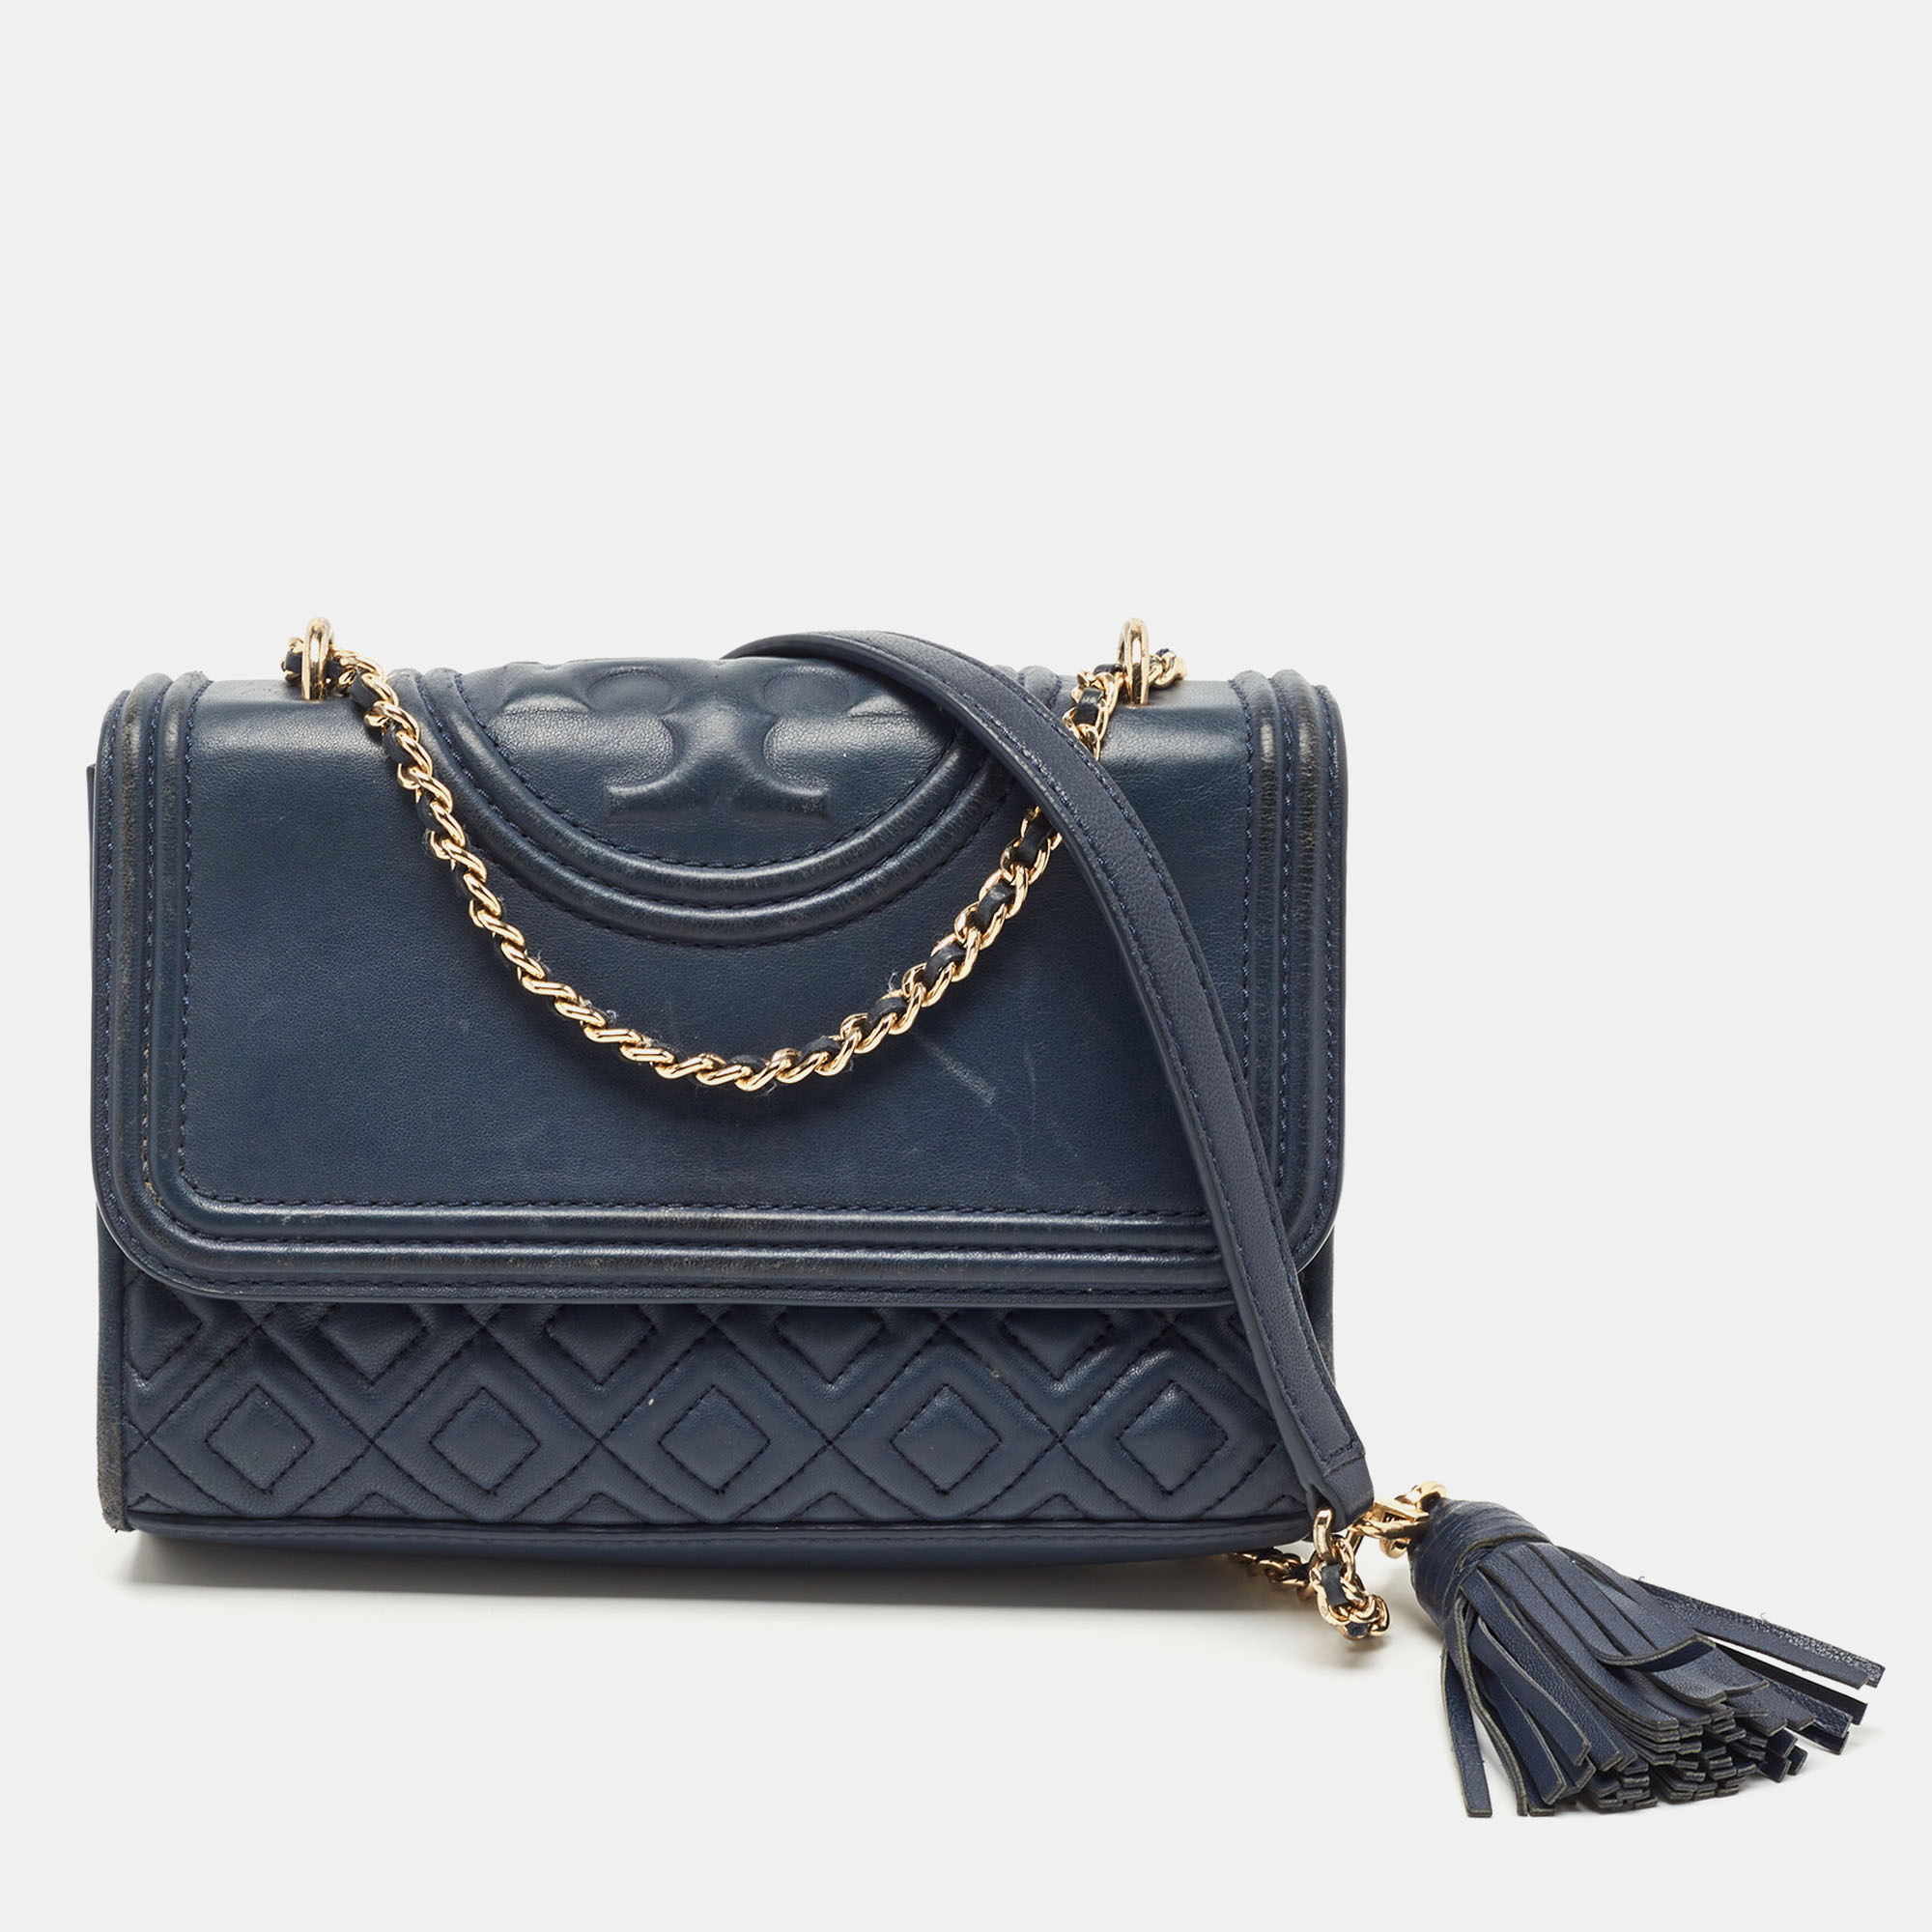 Tory Burch Navy Blue Leather Small Fleming Shoulder Bag